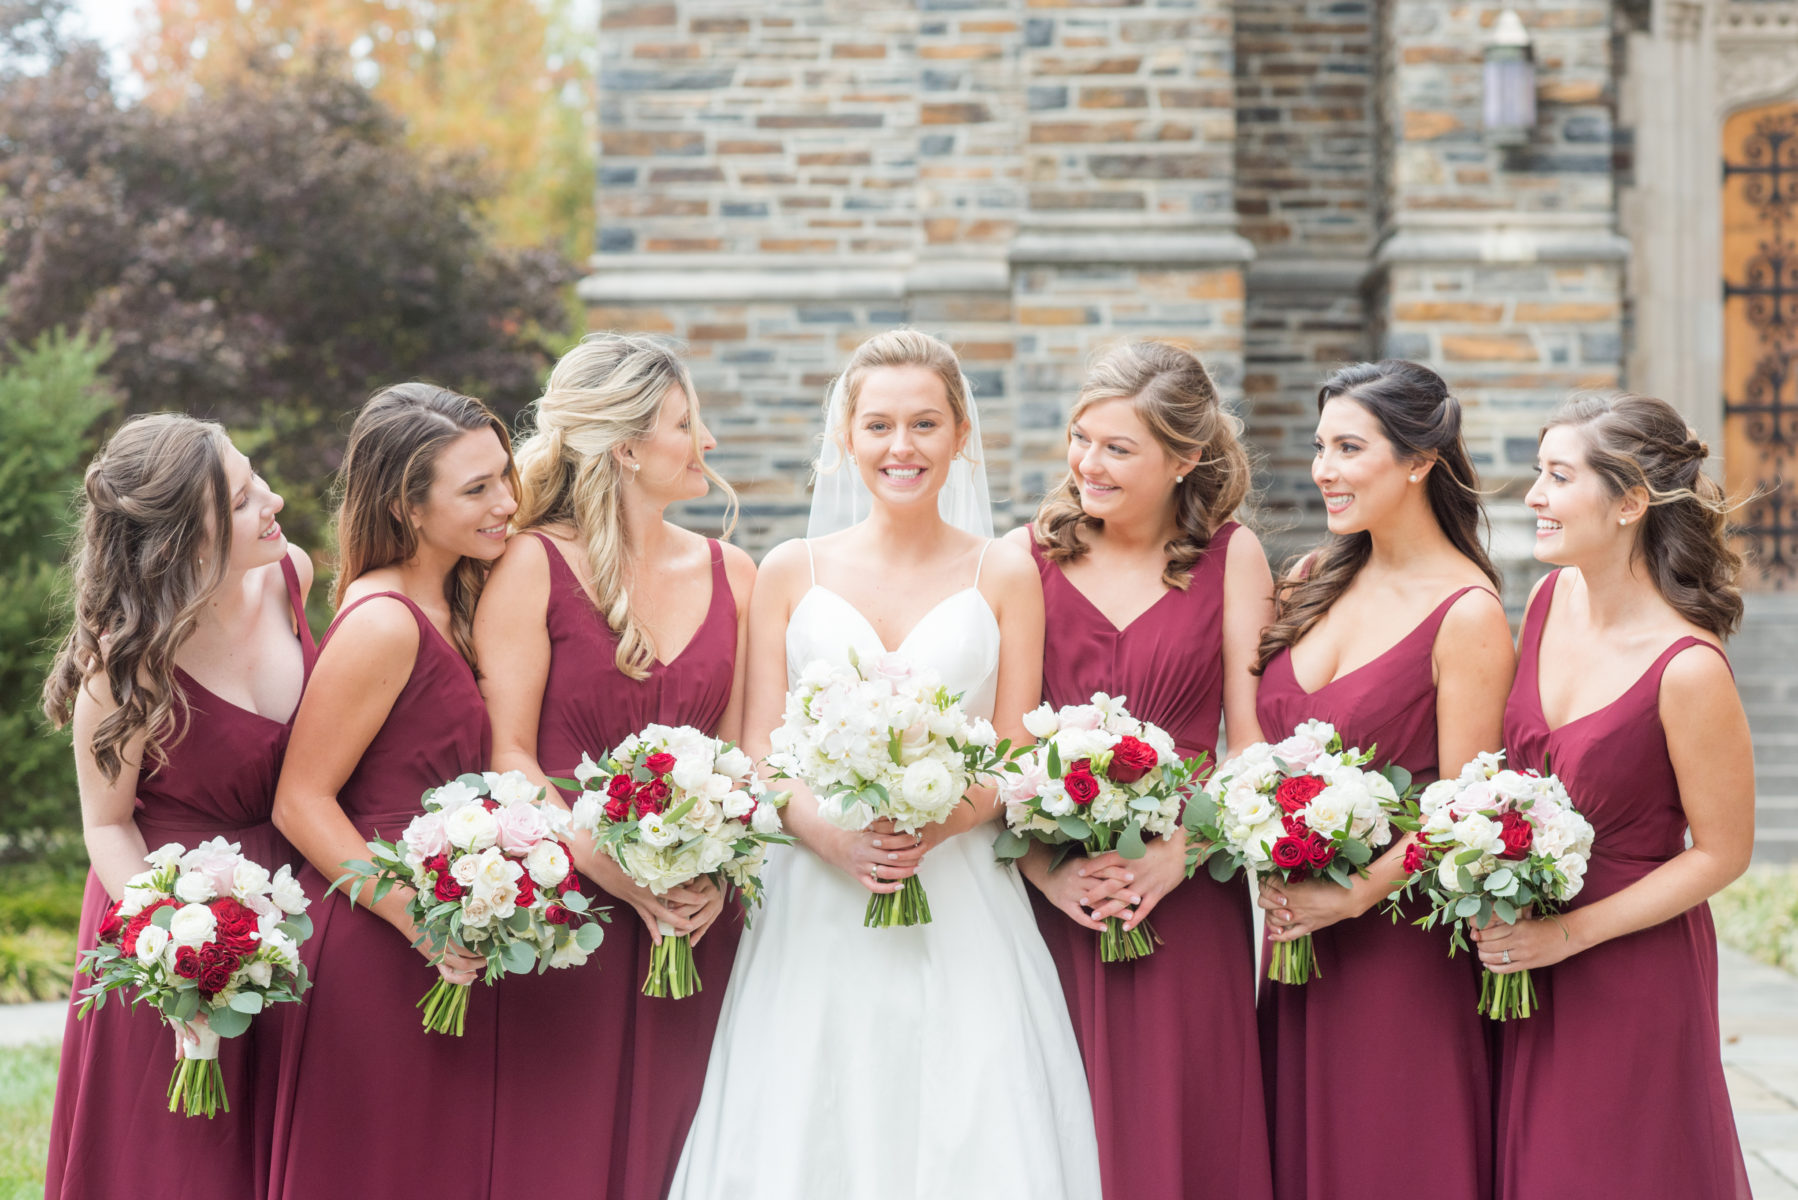 Wedding photographer Mikkel Paige Photography captures a ceremony at Duke Chapel and reception at The Rickhouse, a beautiful downtown venue in Durham, North Carolina. The bridesmaids wore maroon red, chiffon dresses and bride a v-neck white dupioni silk gown. #durhamweddingphotographer #DukeChapelWedding #DurhamWeddingNorthCarolina #DurhamWeddingPhotographer #MikkelPaige #bridesmaids #burgundywedding #maroonwedding